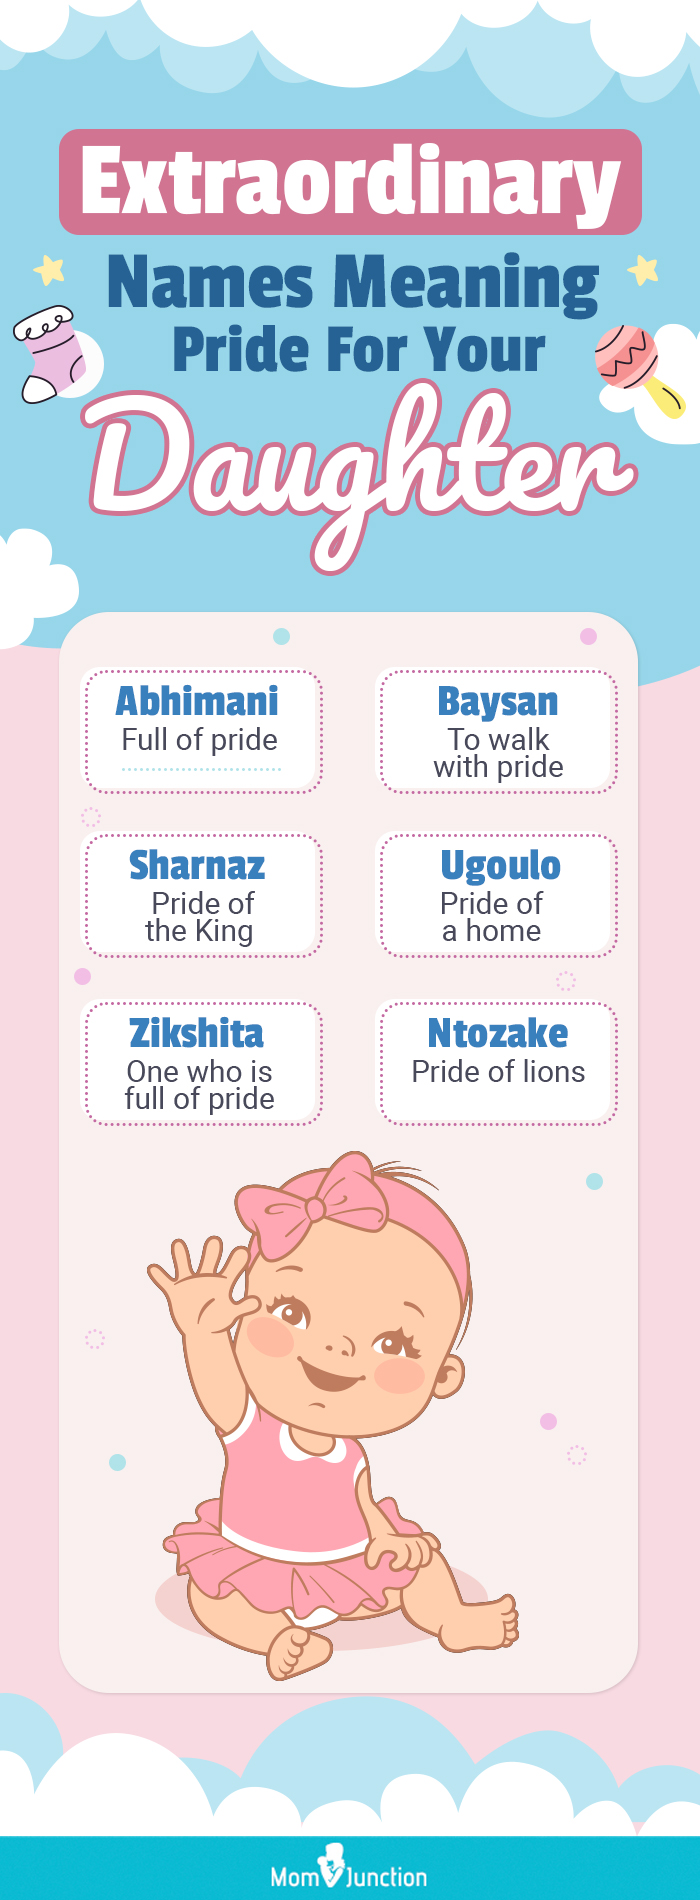 extraordinary names meaning pride for your daughter (infographic)